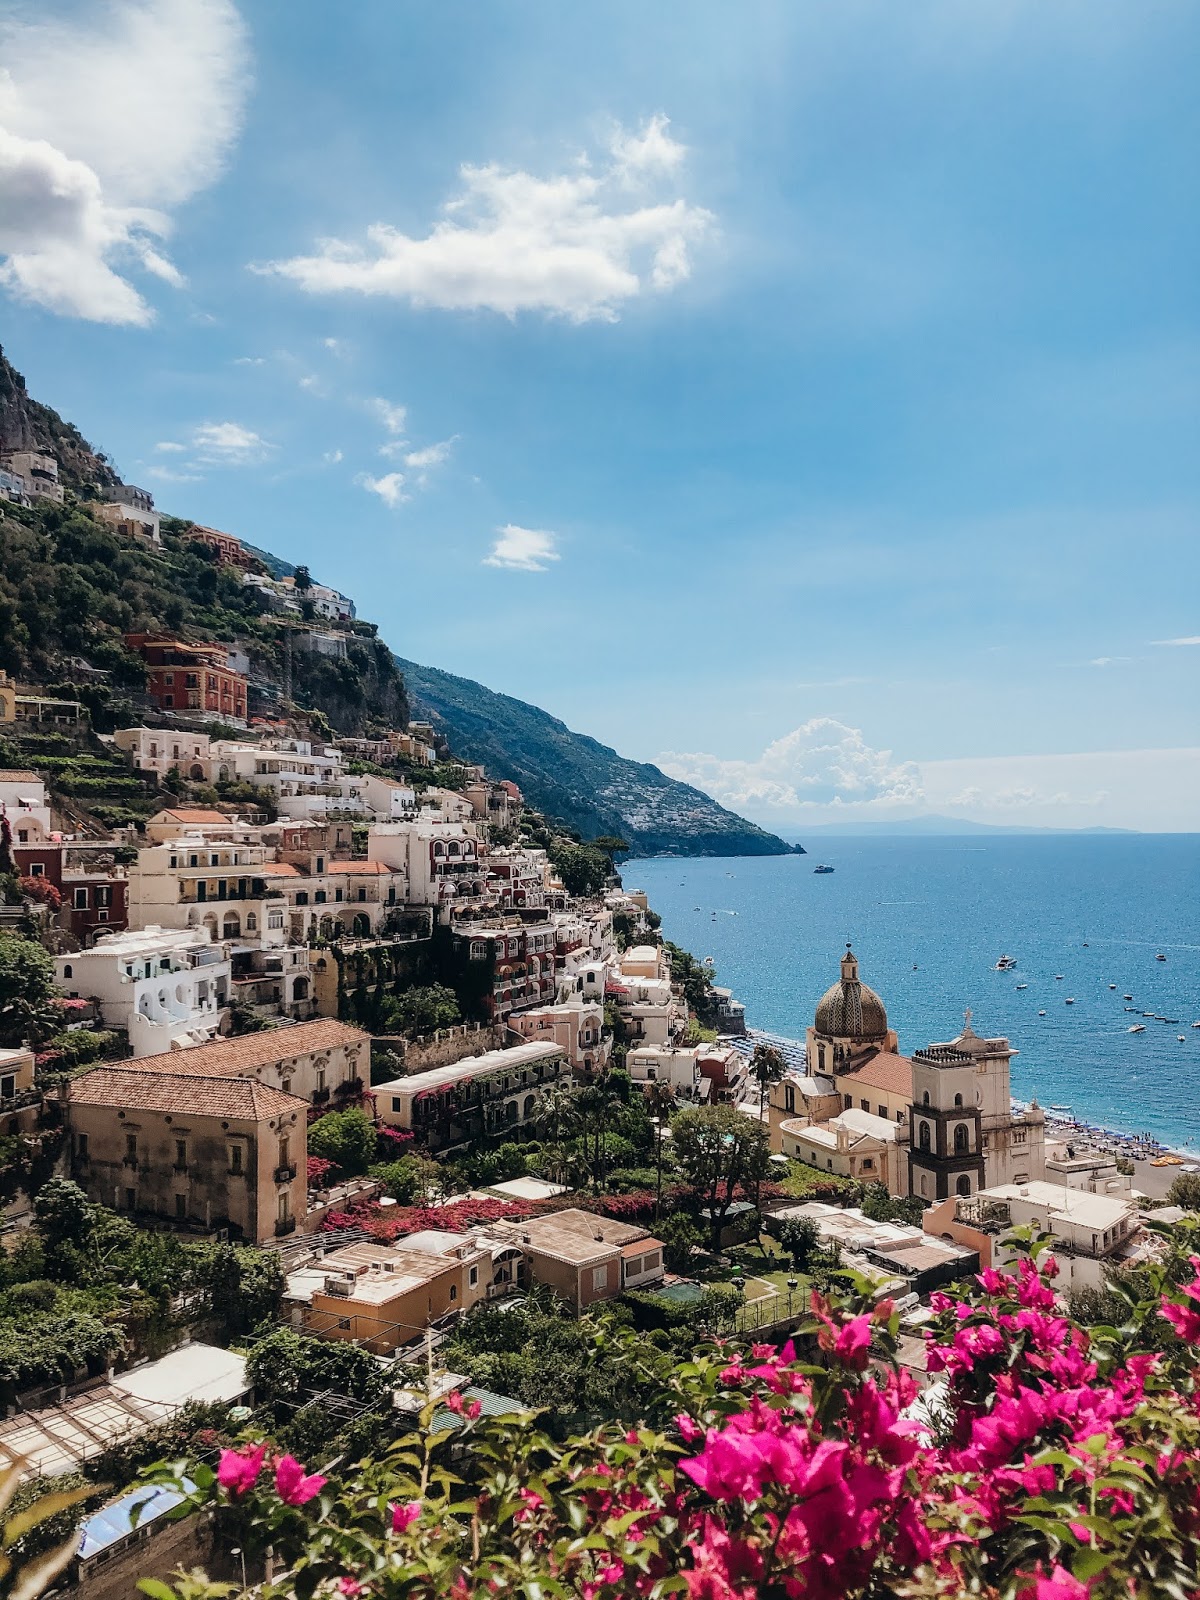 WHAT TO DO IN POSITANO